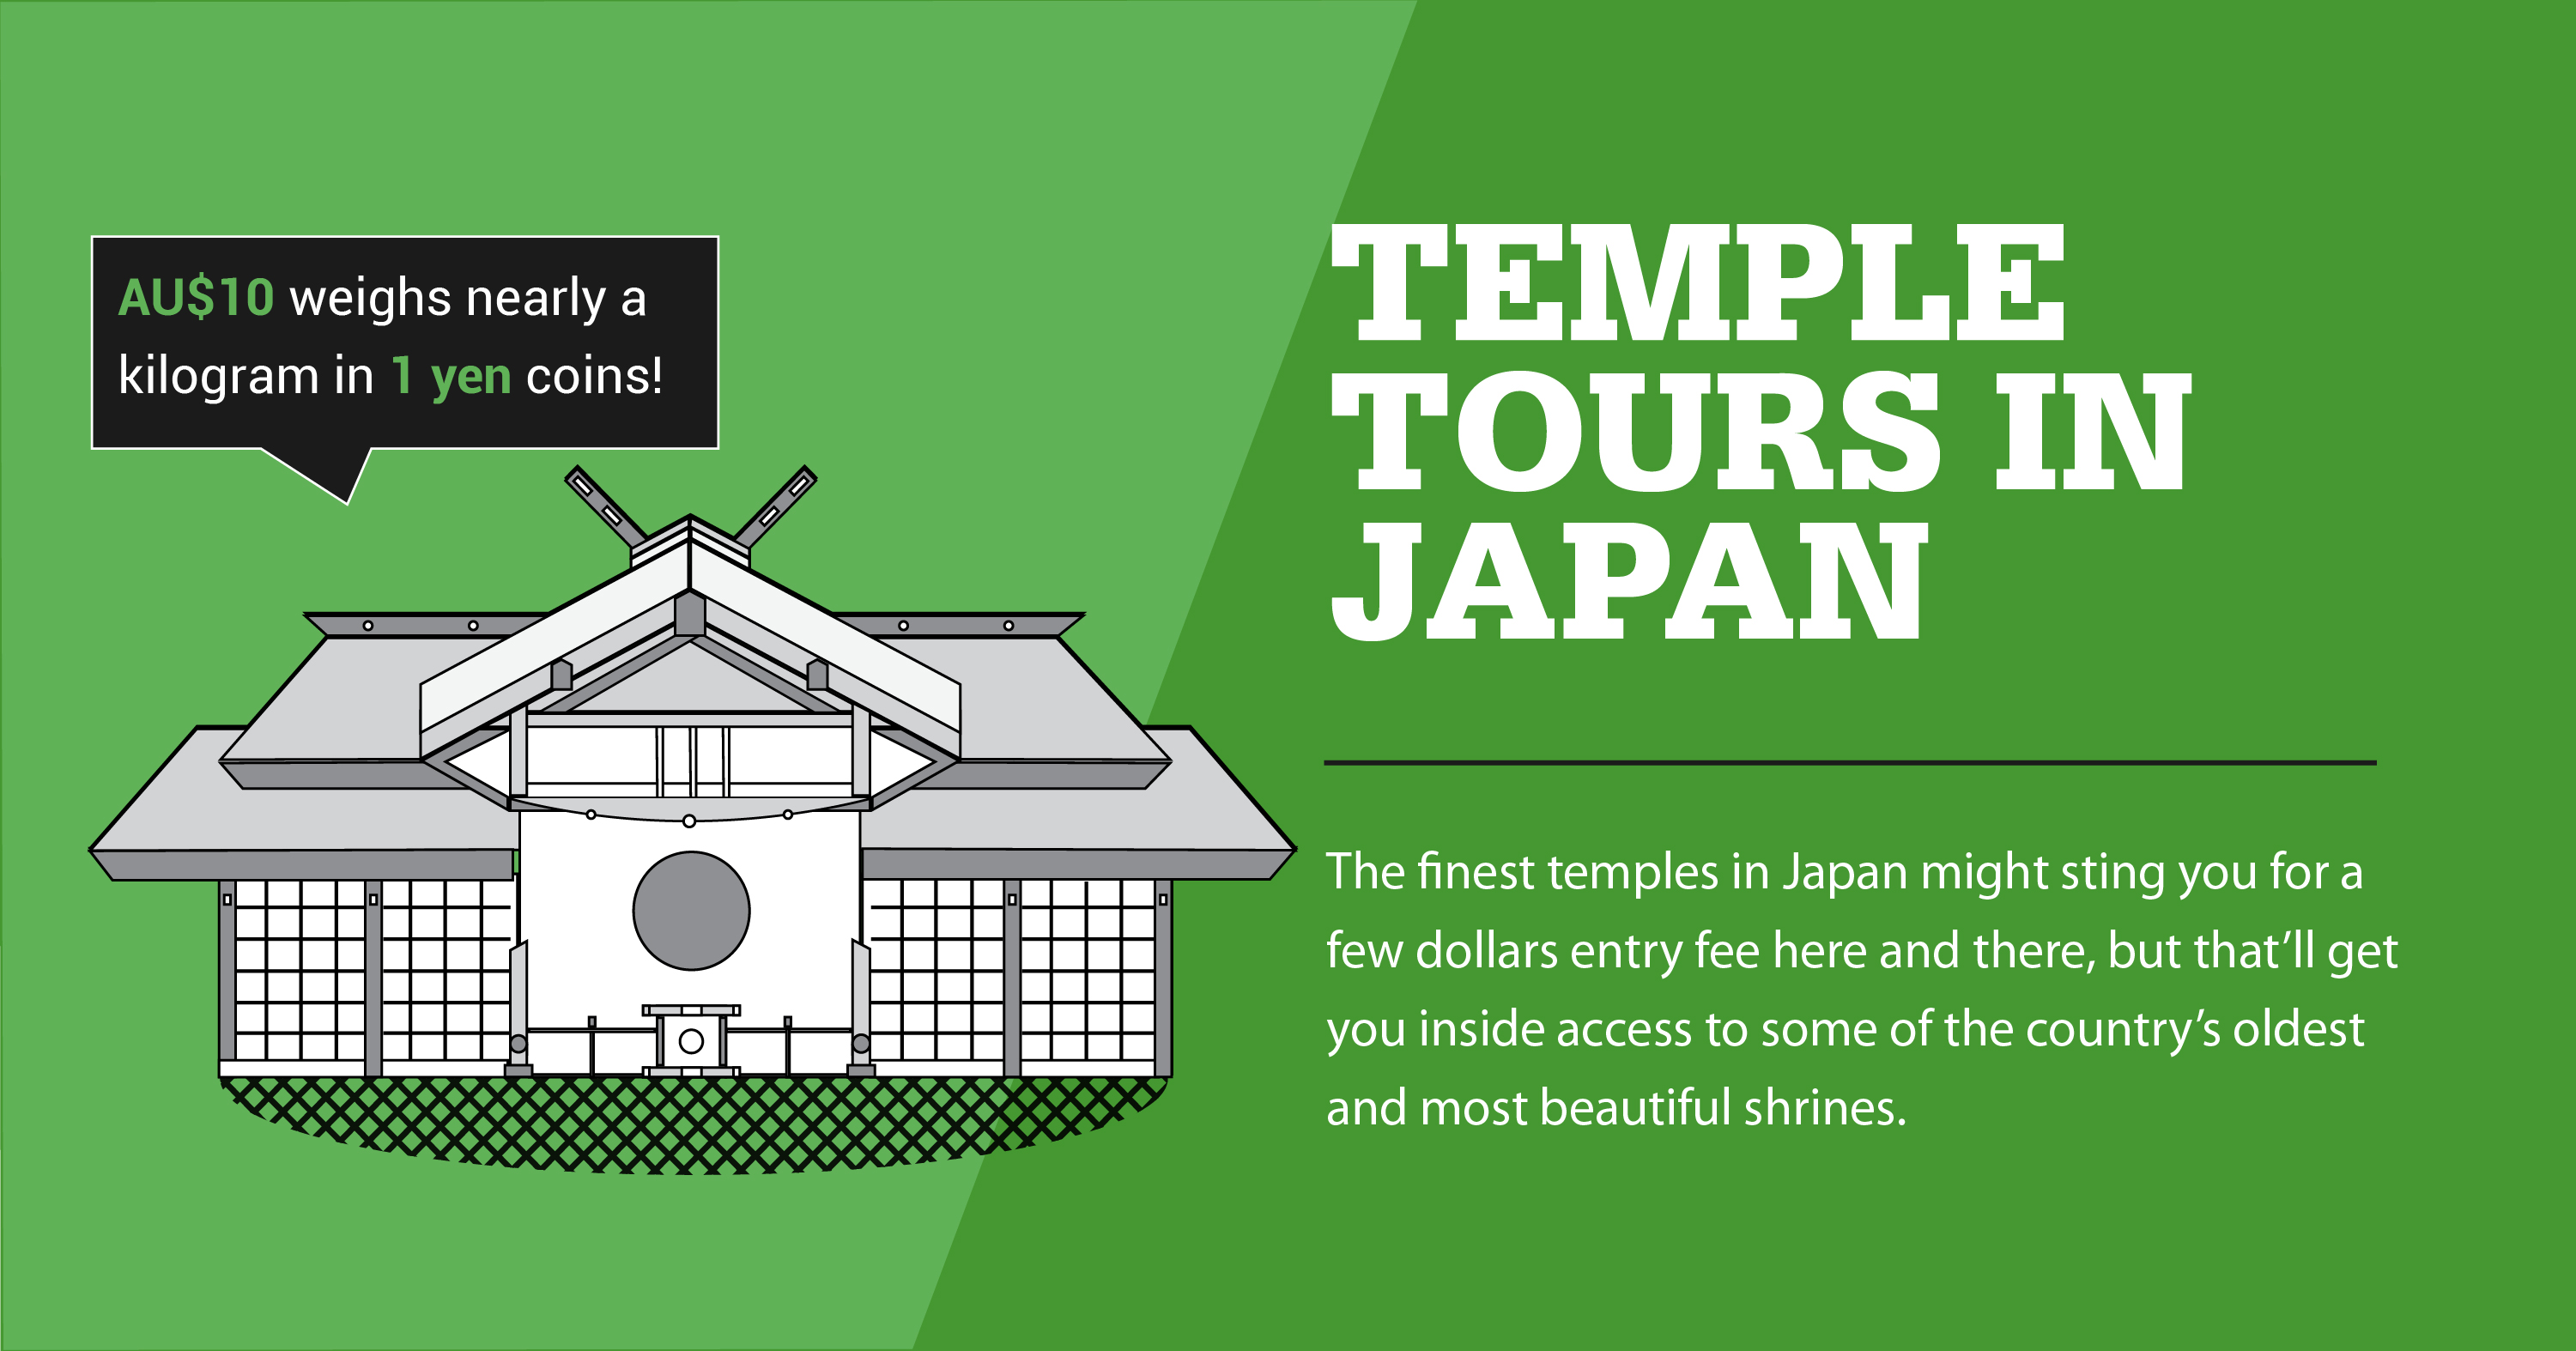 Temple tours in Japan